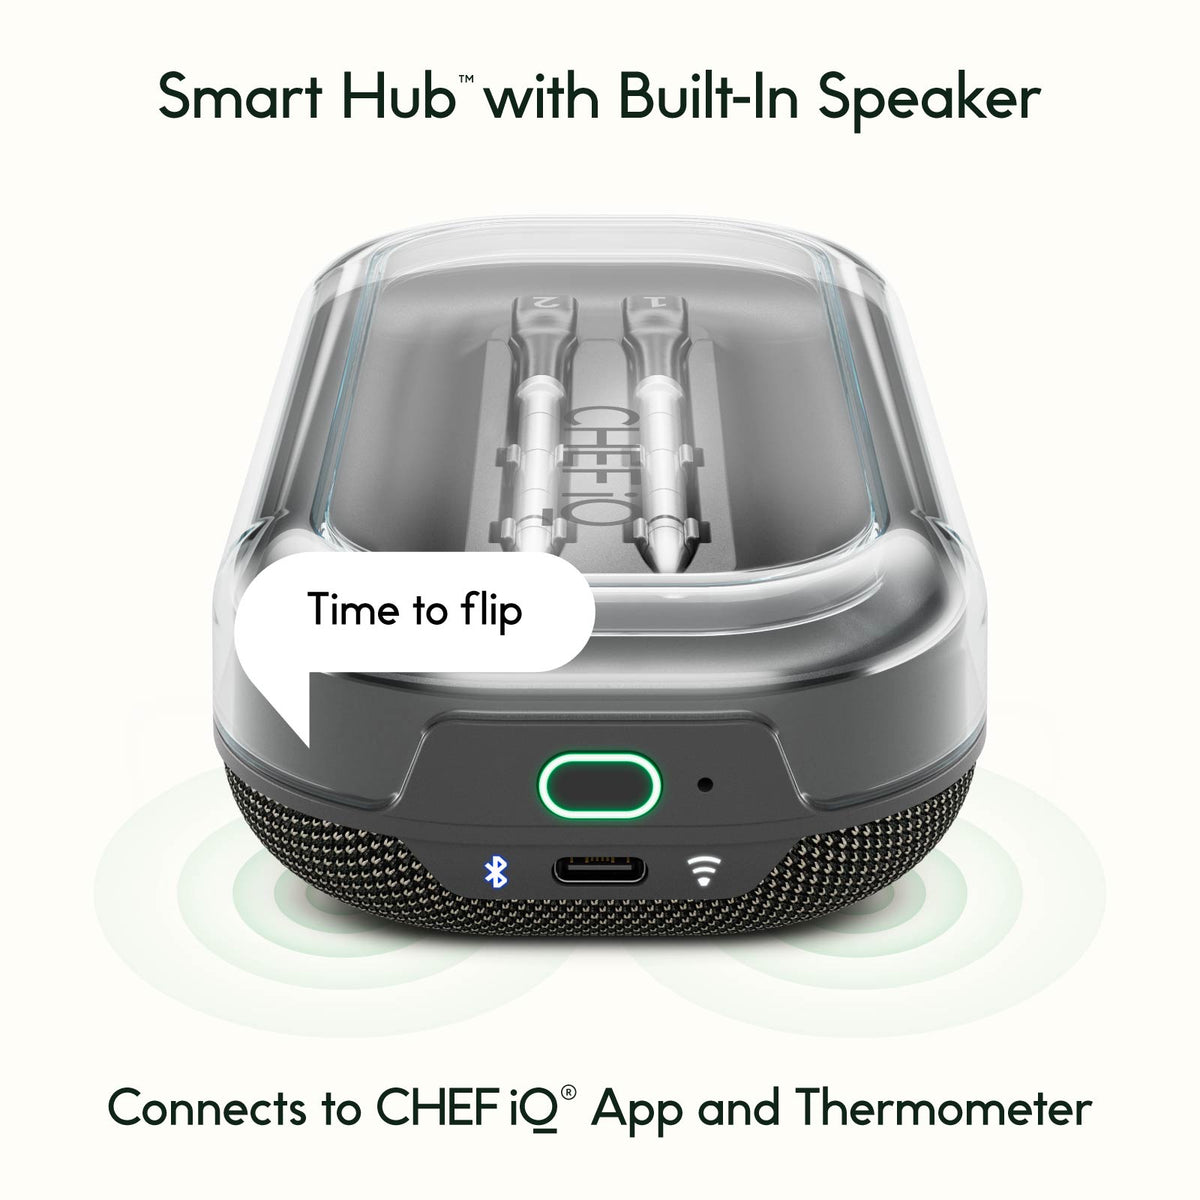 Setup Bluetooth Connection between the Smart Chef app and Smart